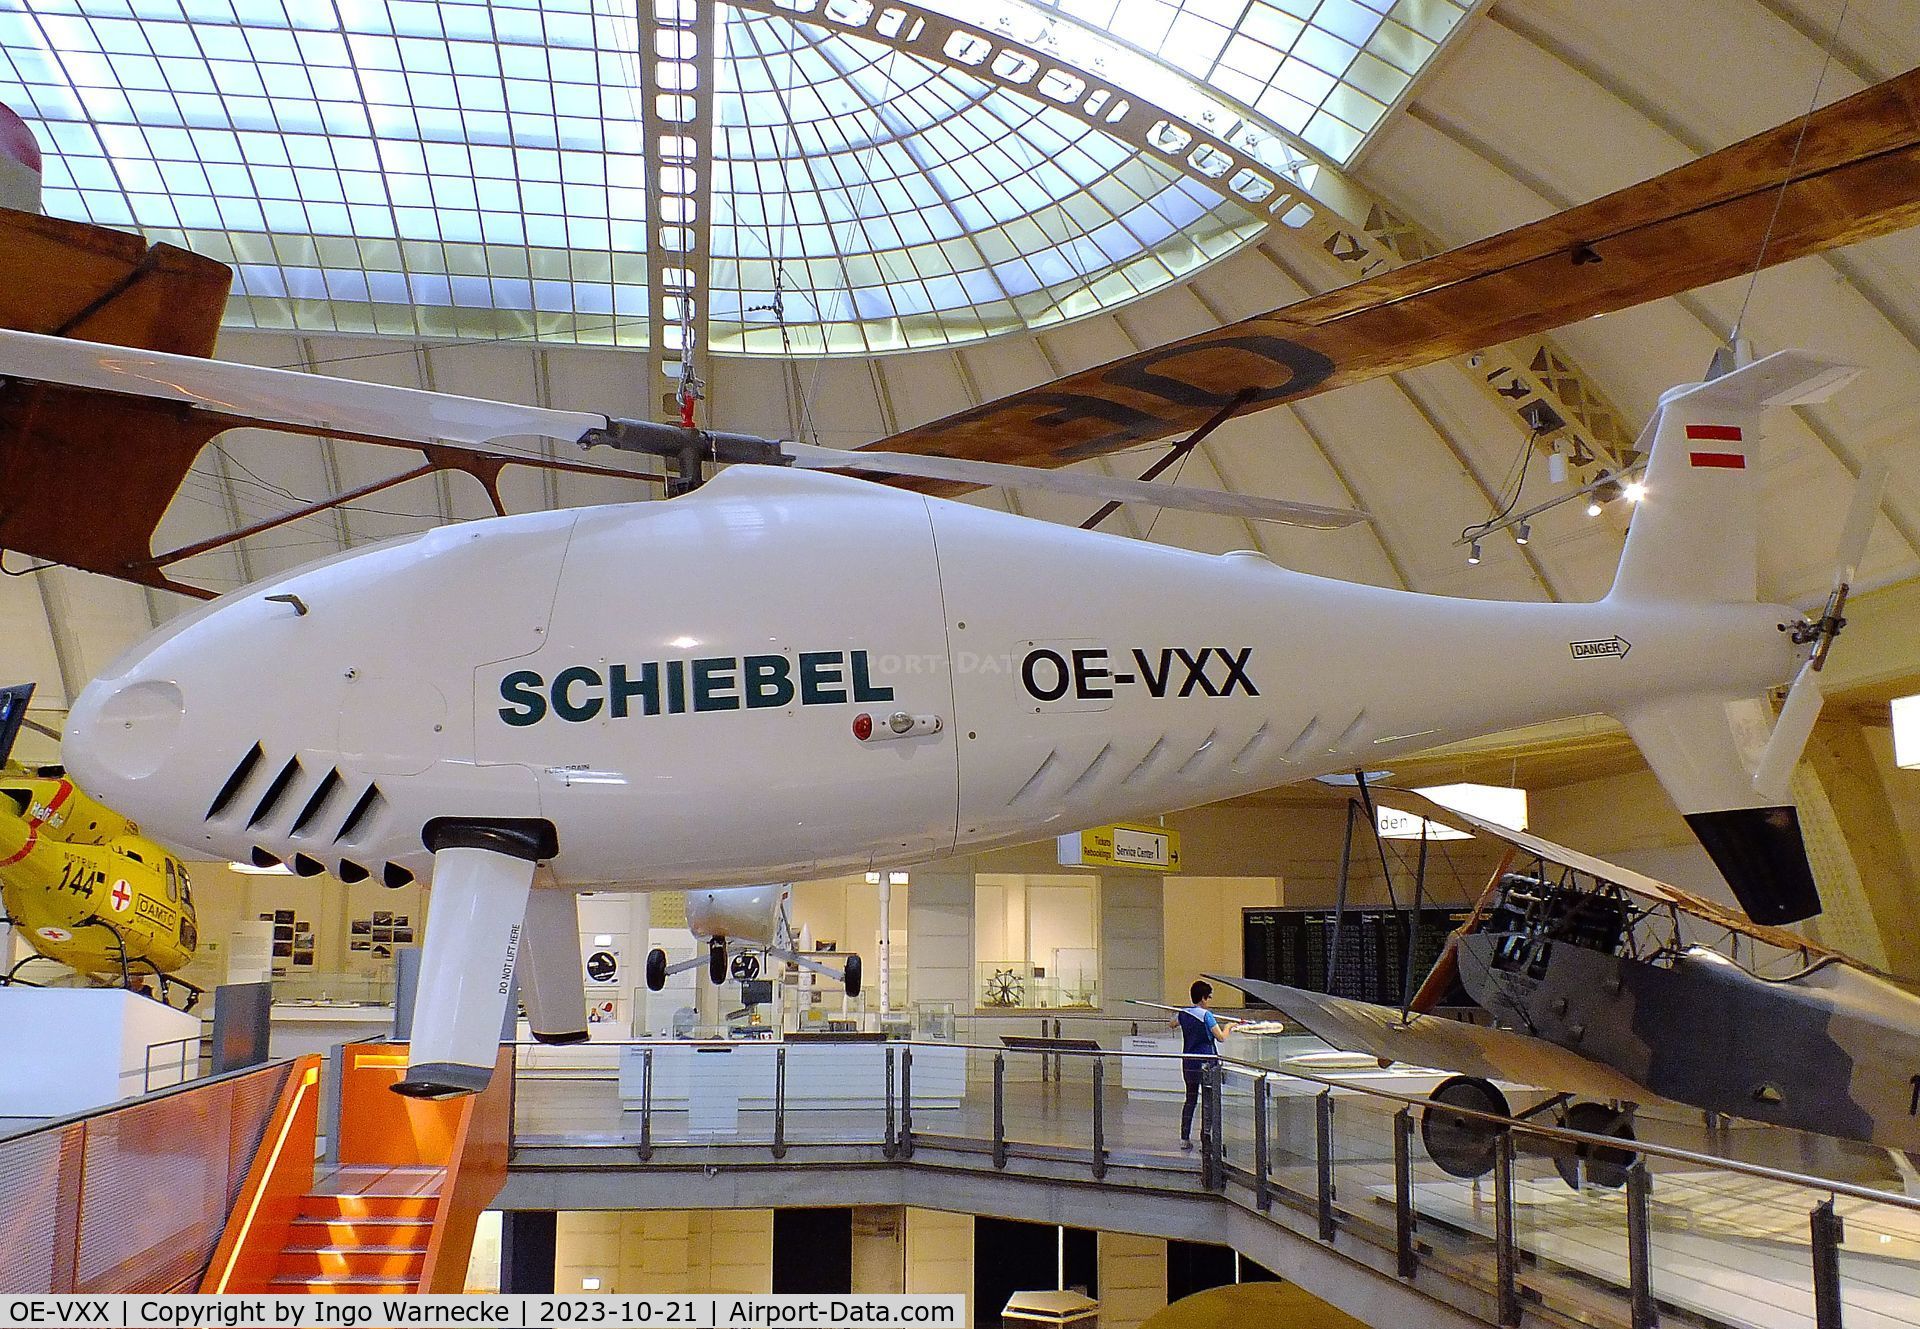 OE-VXX, Schiebel S-100 Camcopter C/N 0250, Schiebel S-100 Camcopter rotary wing drone at the Technisches Museum Wien (Vienna Technical Museum)